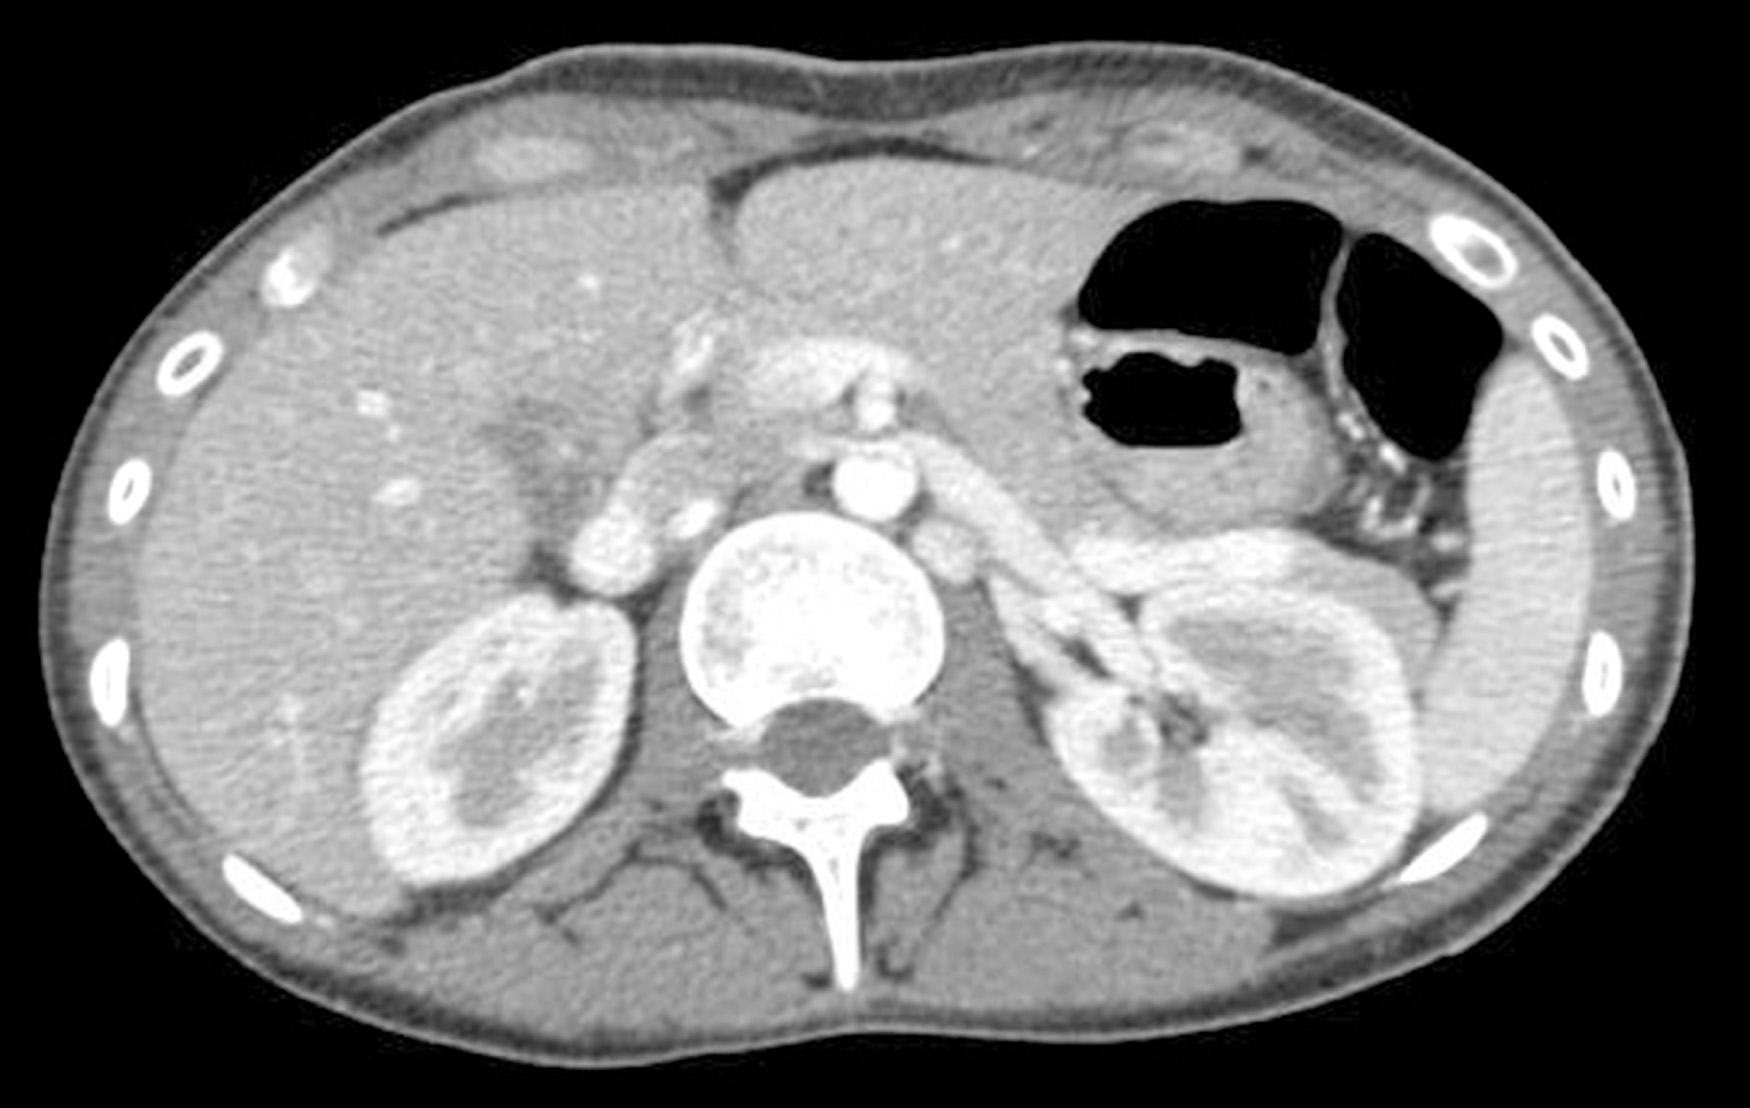 Fig. 21.1, Computed tomography of the abdomen demonstrating compression of the left renal vein. Note the paucity of retroperitoneal fat and steep posterior to anterior course of the left renal vein. The relative importance of compression of the left renal vein by the overlying superior mesenteric artery versus stretching of the vein over the abdominal aorta is unknown.